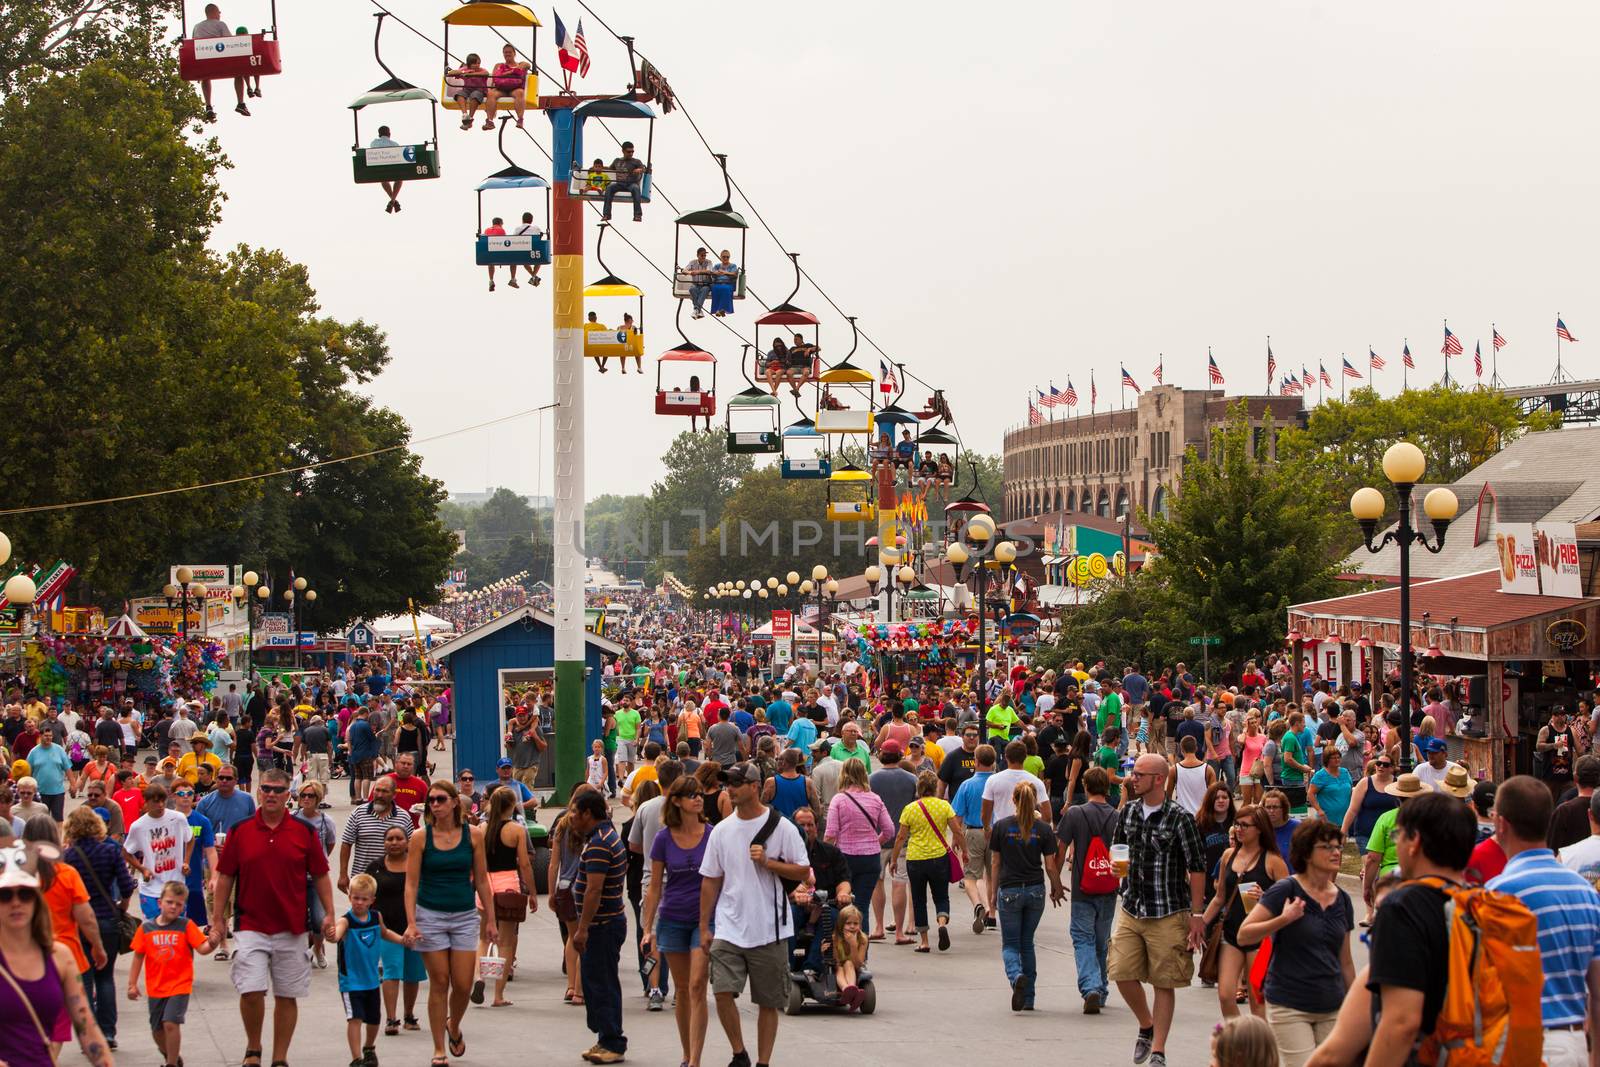 DES MOINES, IA /USA - AUGUST 10: Attendees at the Iowa State Fair. Thousands of people filling the midway at the Iowa State Fair on August 10, 2014 in Des Moines, Iowa, USA.